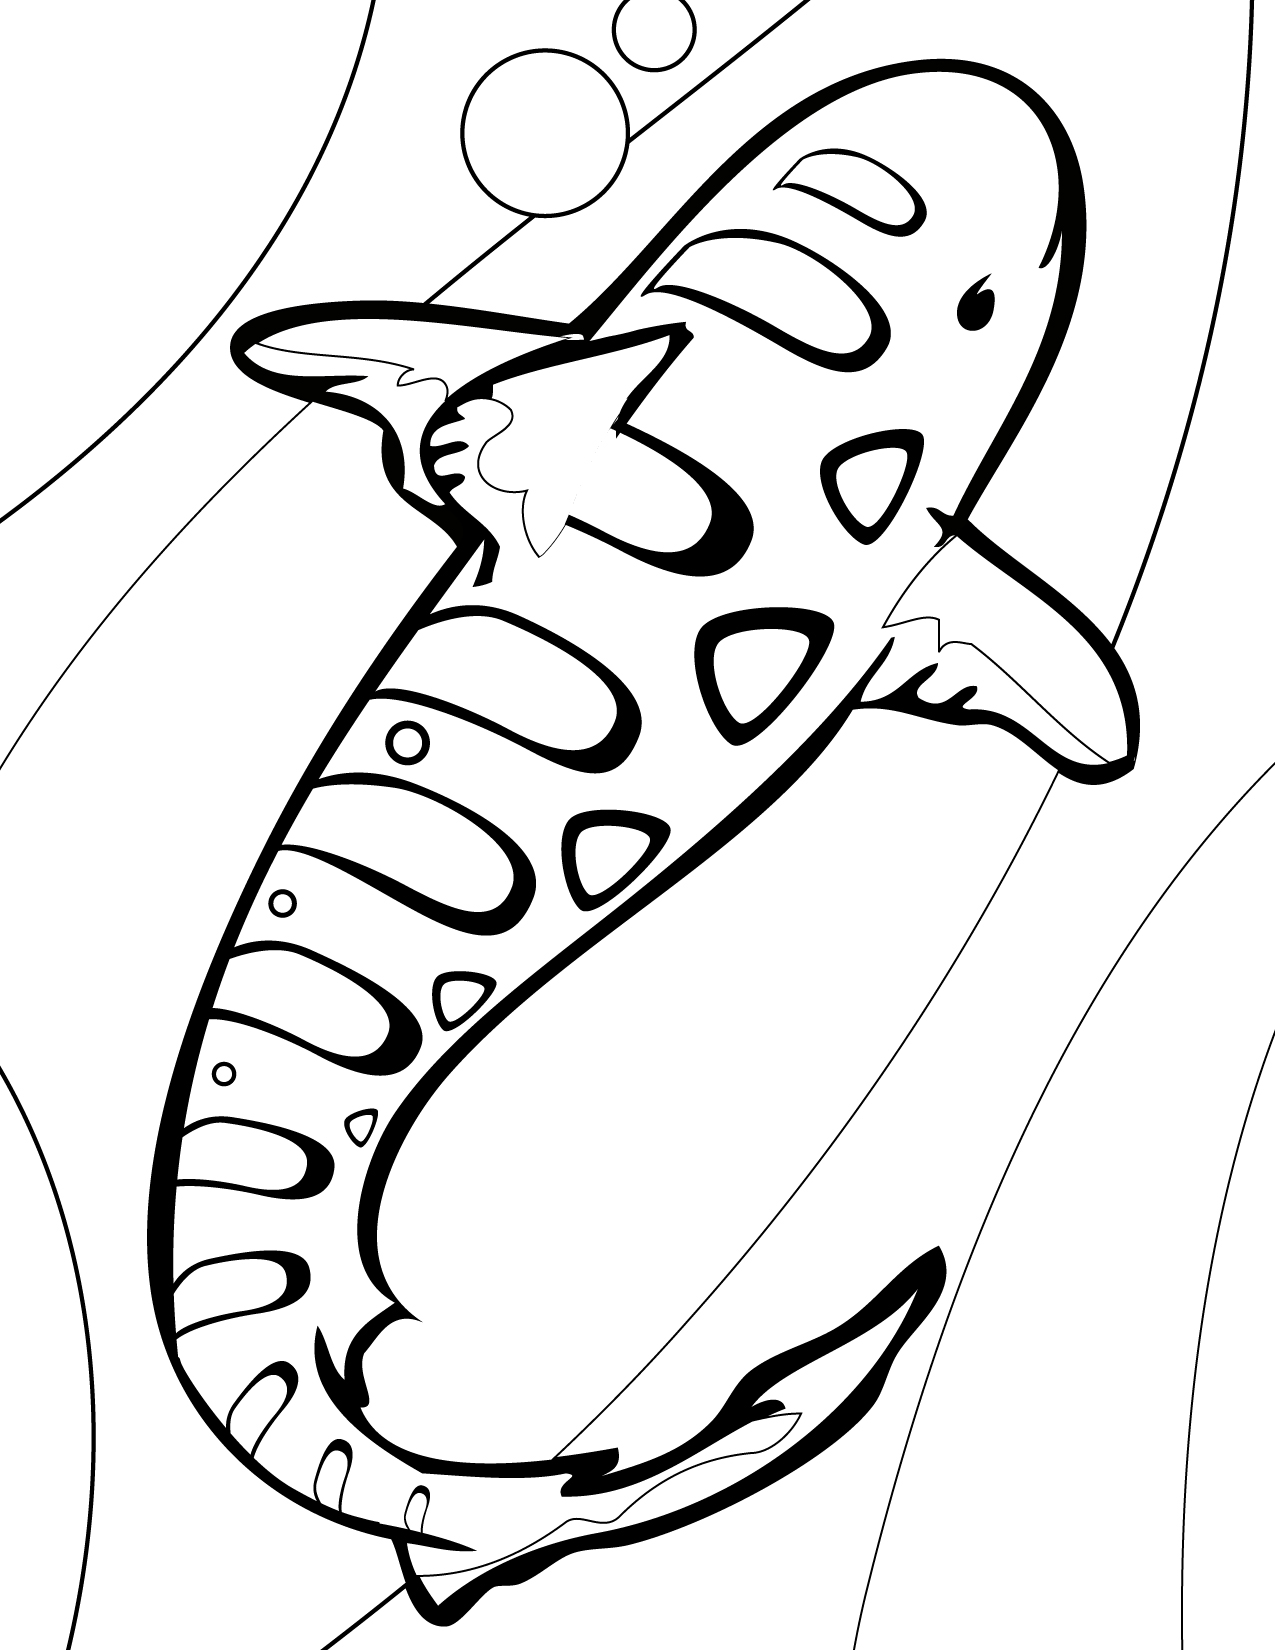 Leopard Shark clipart #4, Download drawings